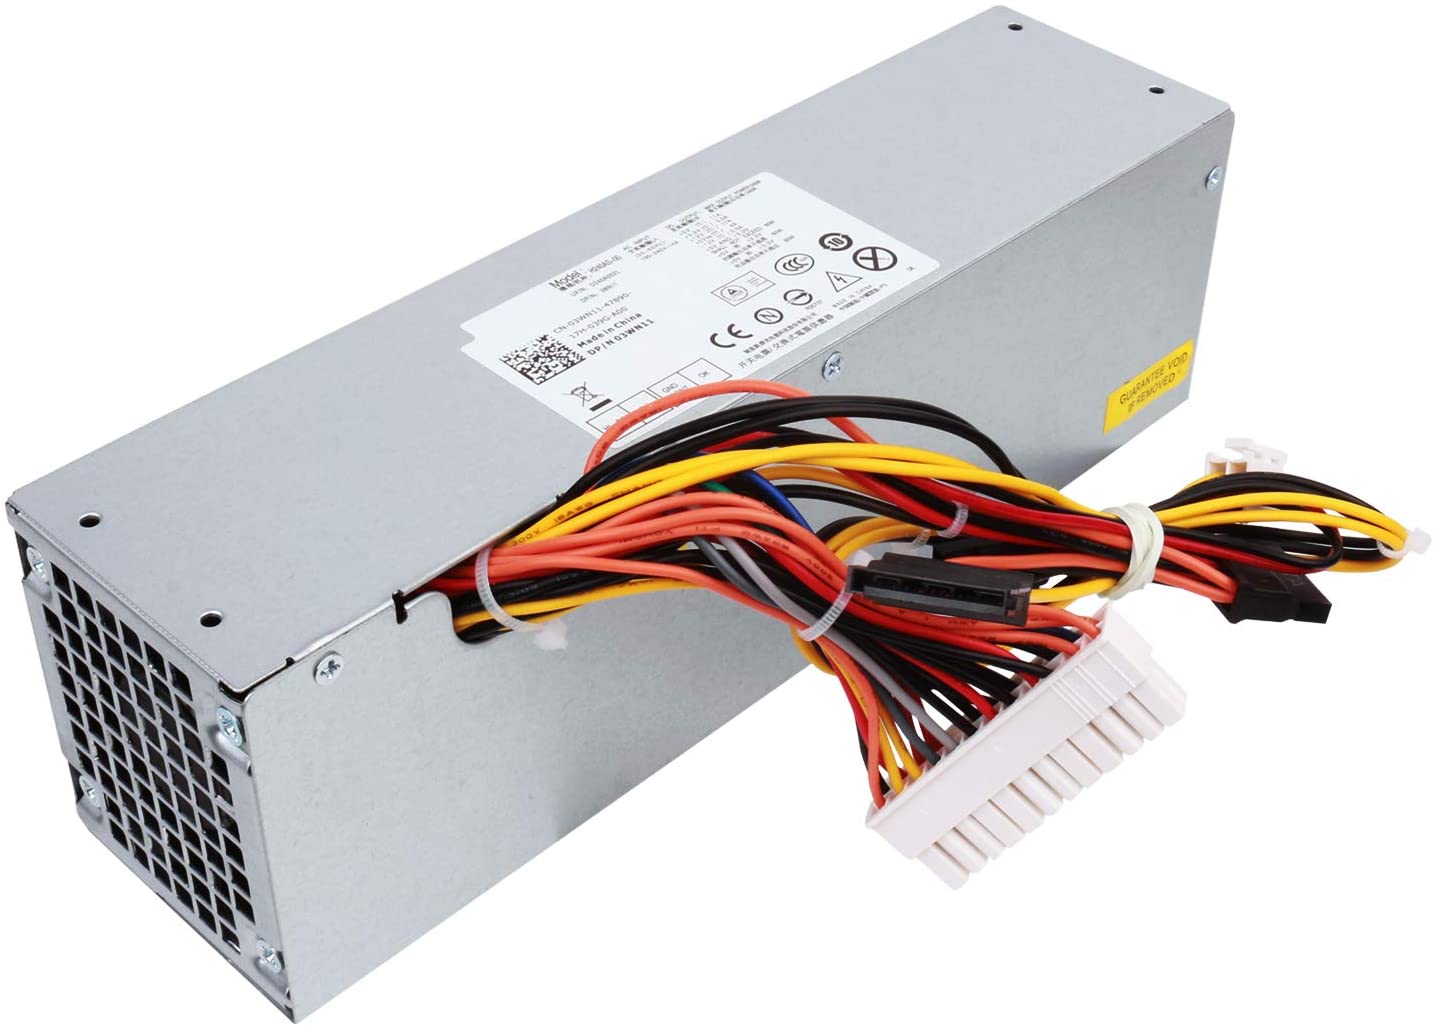 S-Union 240W Power Supply Unit Replacement for Dell OptiPlex 390 790 960 990 3010 9010 Small Form Factor System SFF H240AS-00 H240AS-01 H240ES-00 D240ES-00 AC240AS-00 AC240ES-00 L240AS-00 PH3C2